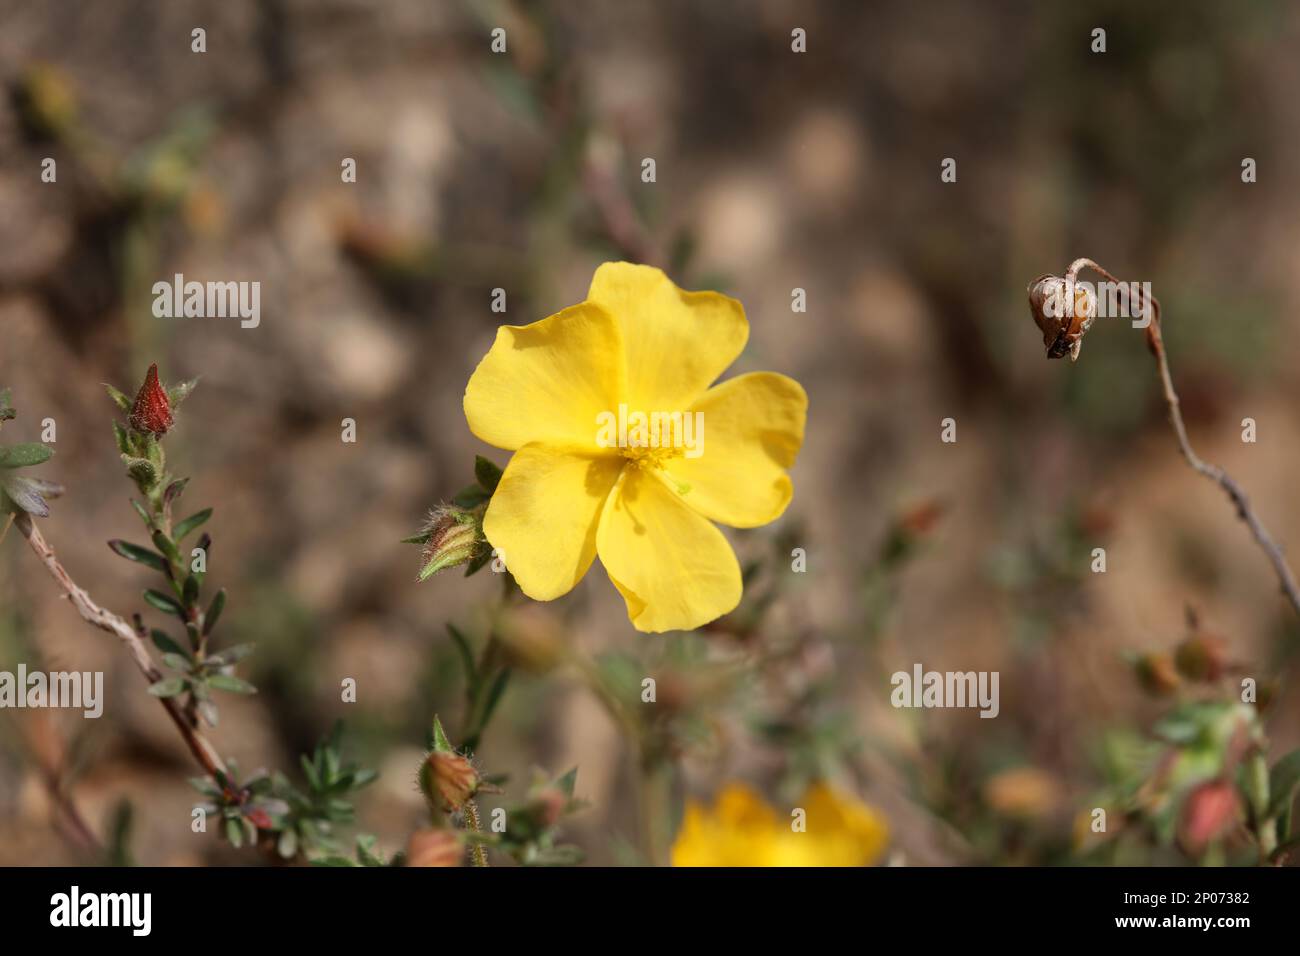 Yellow flower blossom close up background fumana arabica family cistaceae botanical big size high quality print Stock Photo